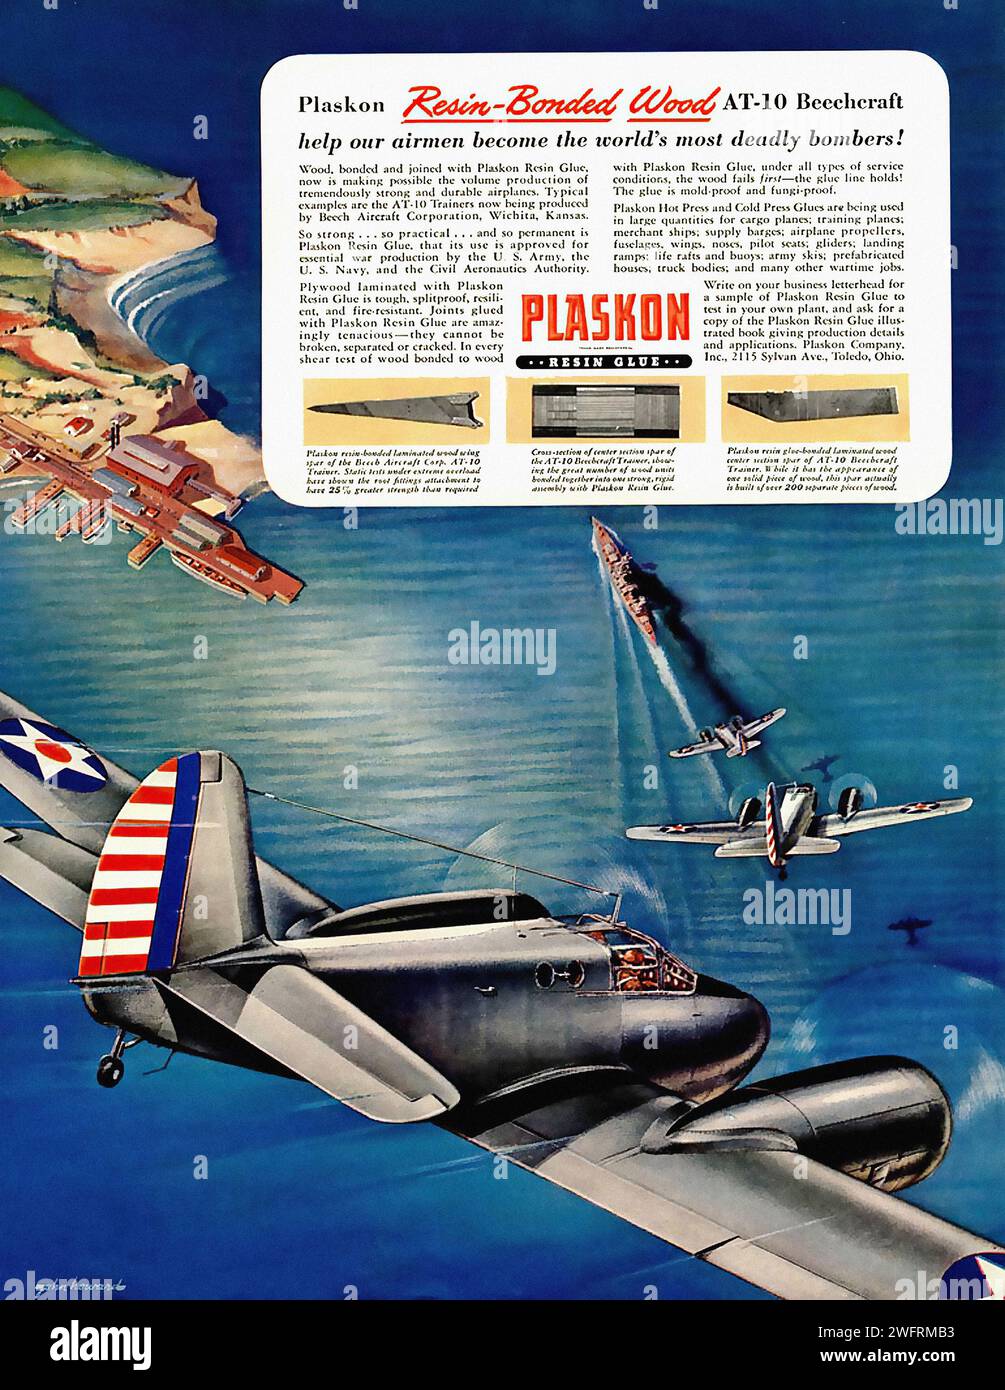 “PLASKON RADIO-BONDED WEST A-10 BEECHCRAFT HELP OUR AIRMEN BECOME THE WORLD’S MOST DEADLY BOMBERS!”  This is a vintage American advertisement from the World War II era for Plaskon, a company that specialized in radio-bonded aircraft. The advertisement features a large, striking illustration of a dark blue bomber aircraft with white and red stripes on the tail and wings, flying over a coastline. Two smaller aircraft are seen flying in formation behind the bomber. The backdrop is a vivid blue sky with clouds and a detailed coastline with buildings and ships. The graphic style of the advertisemen Stock Photo